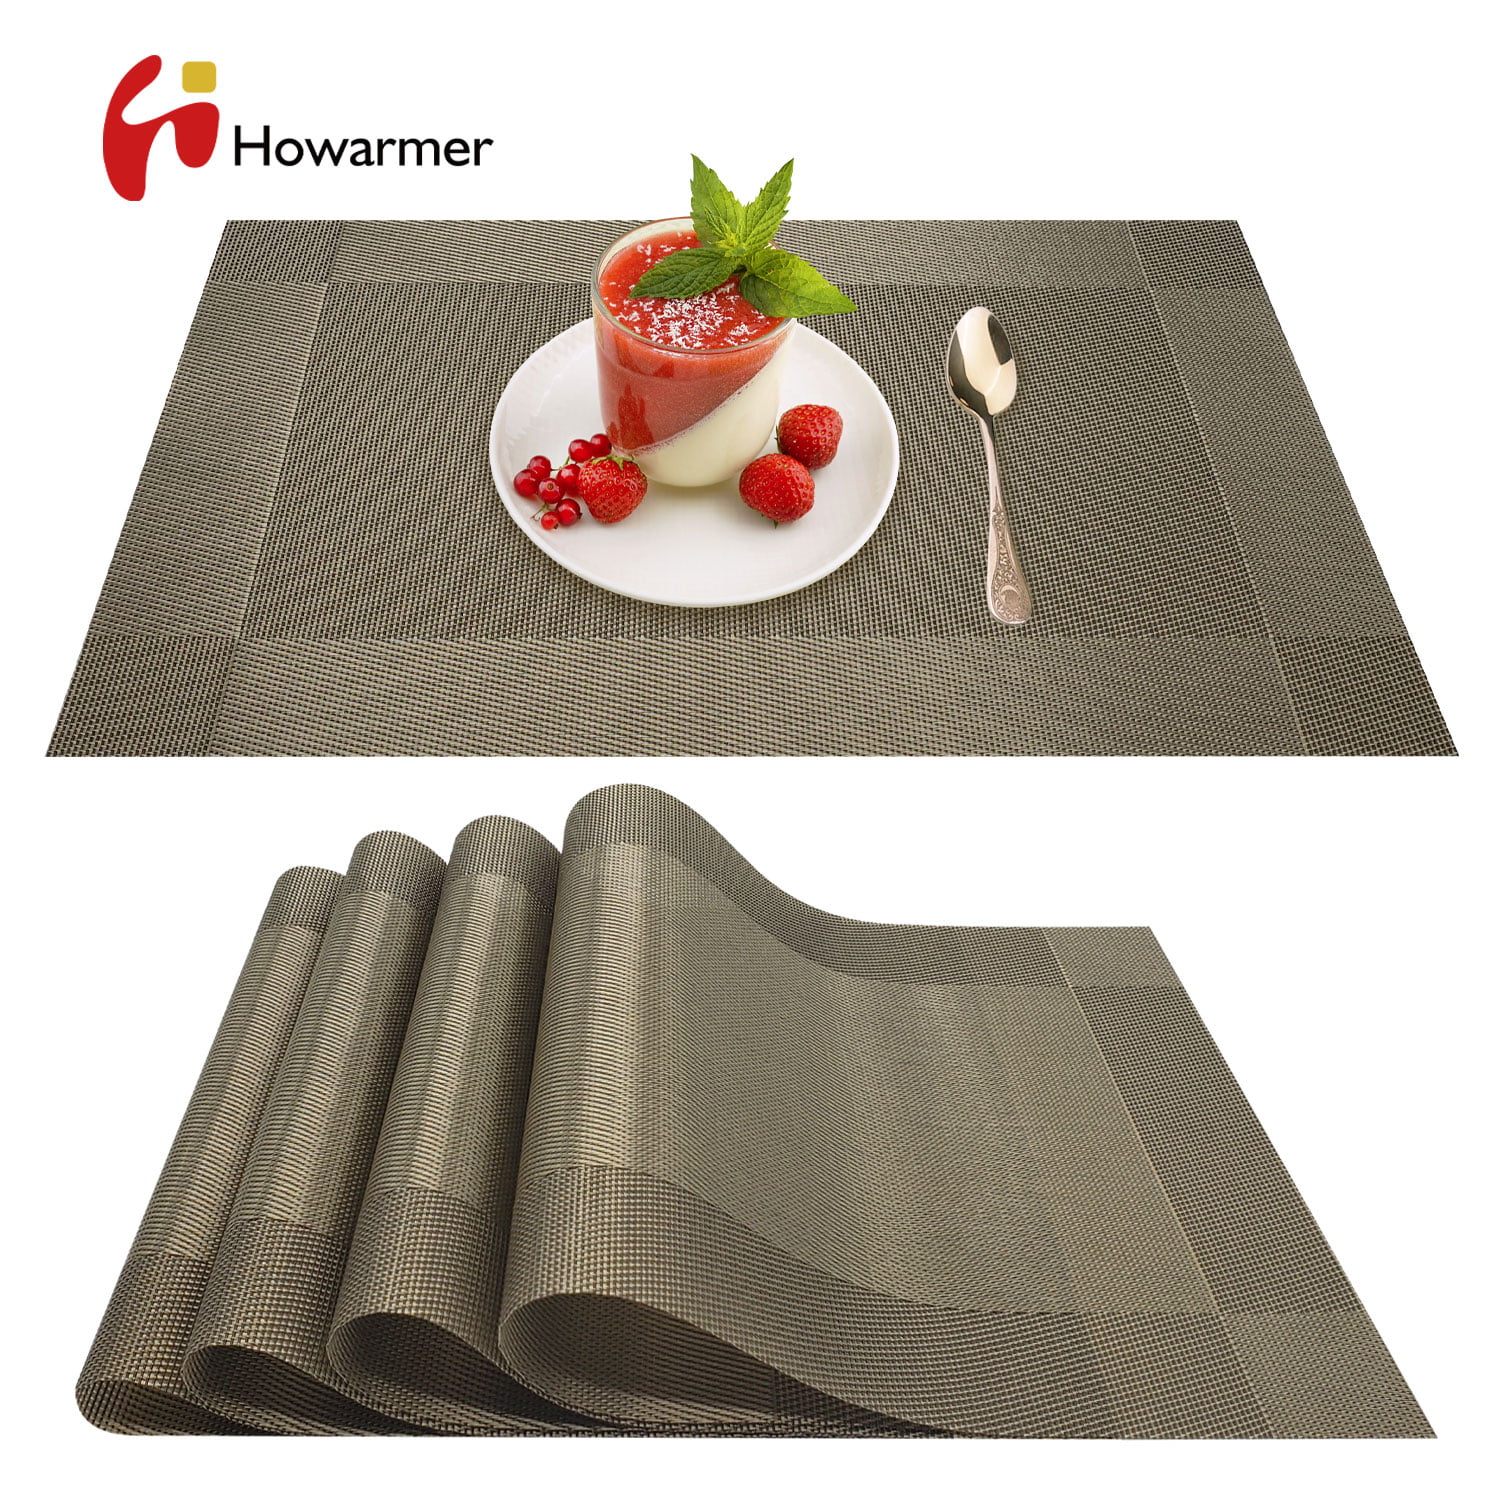 Placemats Heat-Resistant Washable Woven Anti-Skid PVC Dinner Table Mats  Leaves